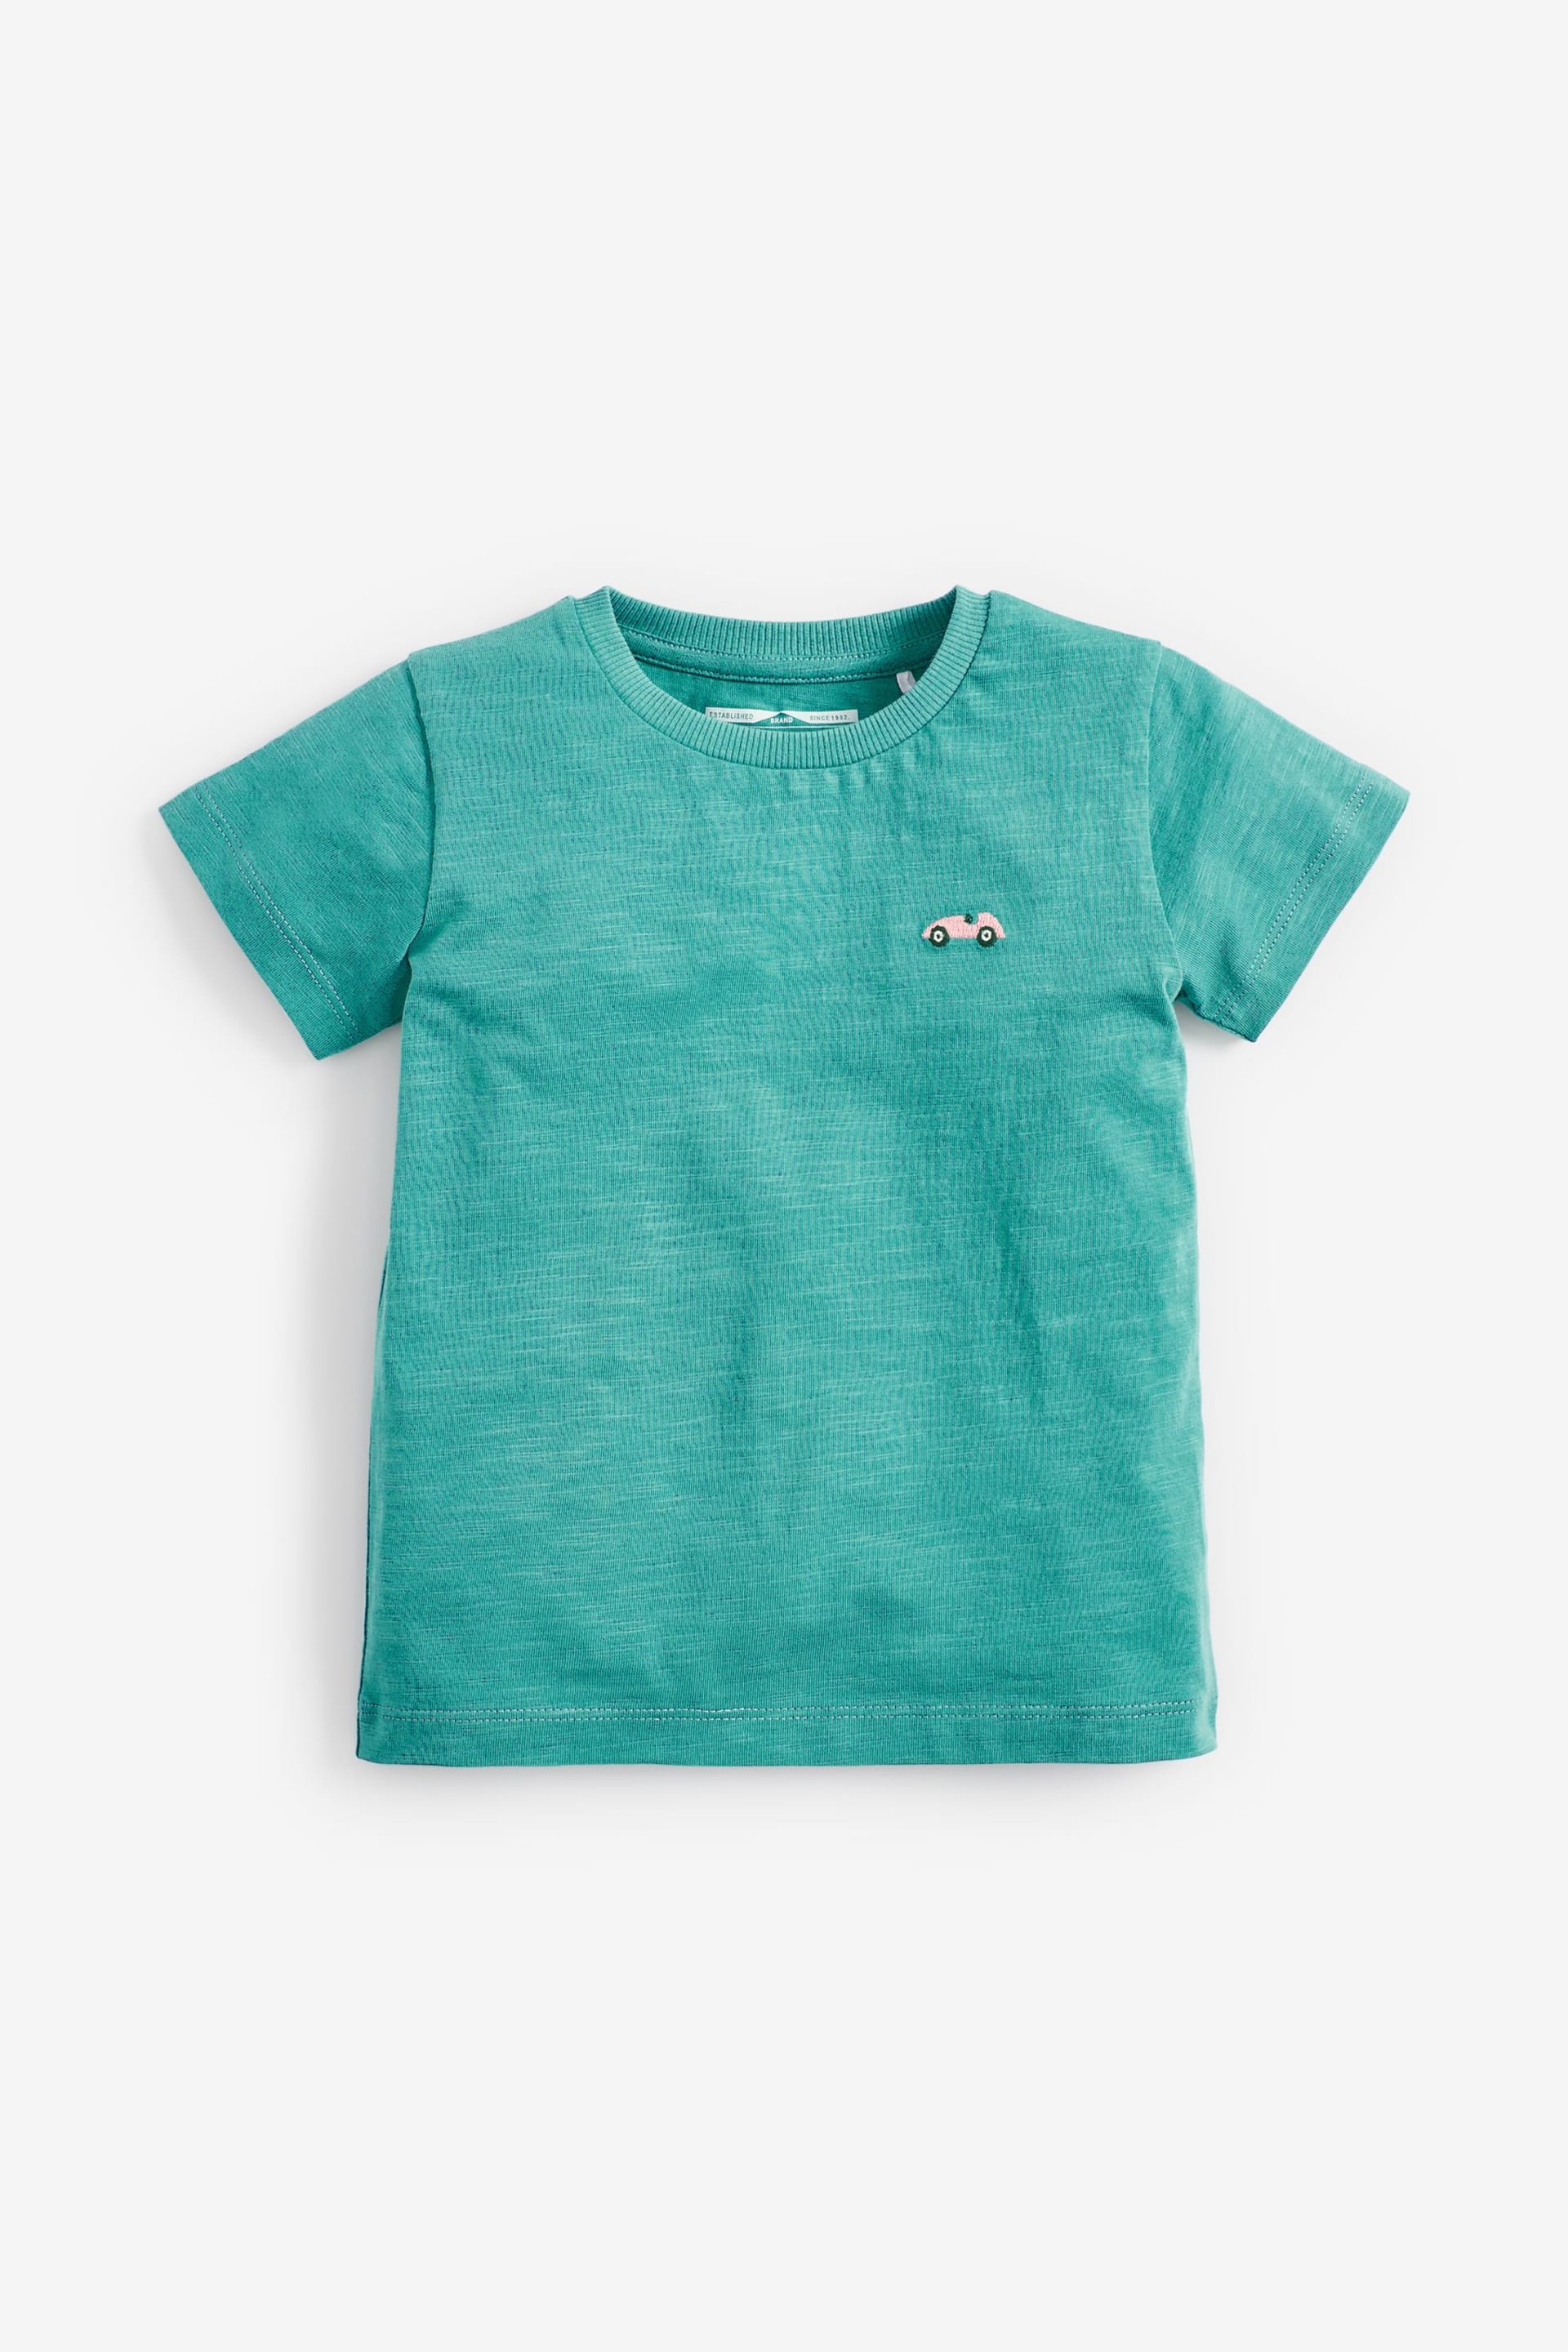 Mineral Short Sleeve T-Shirts 5 Pack (3mths-7yrs) - Image 6 of 8